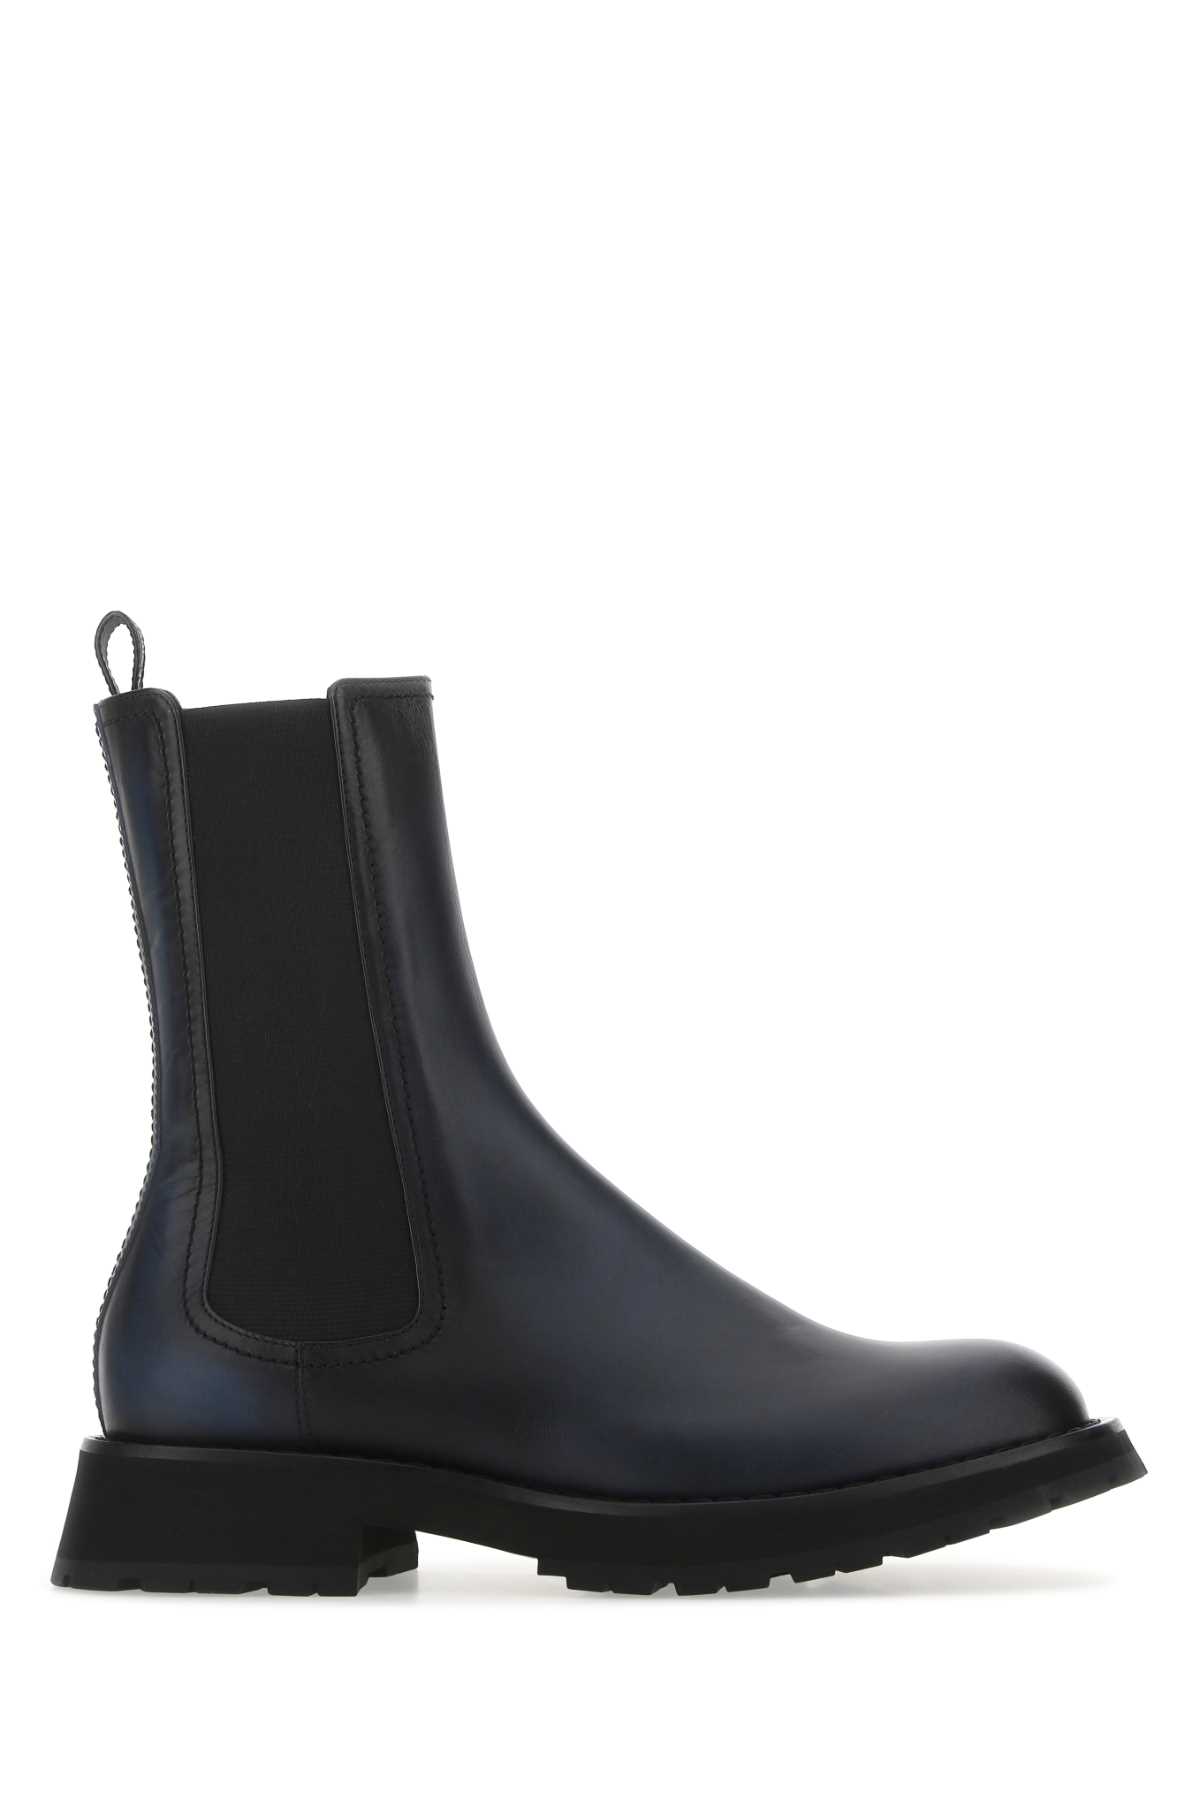 Alexander McQueen Two-tone Leather Ankle Boots